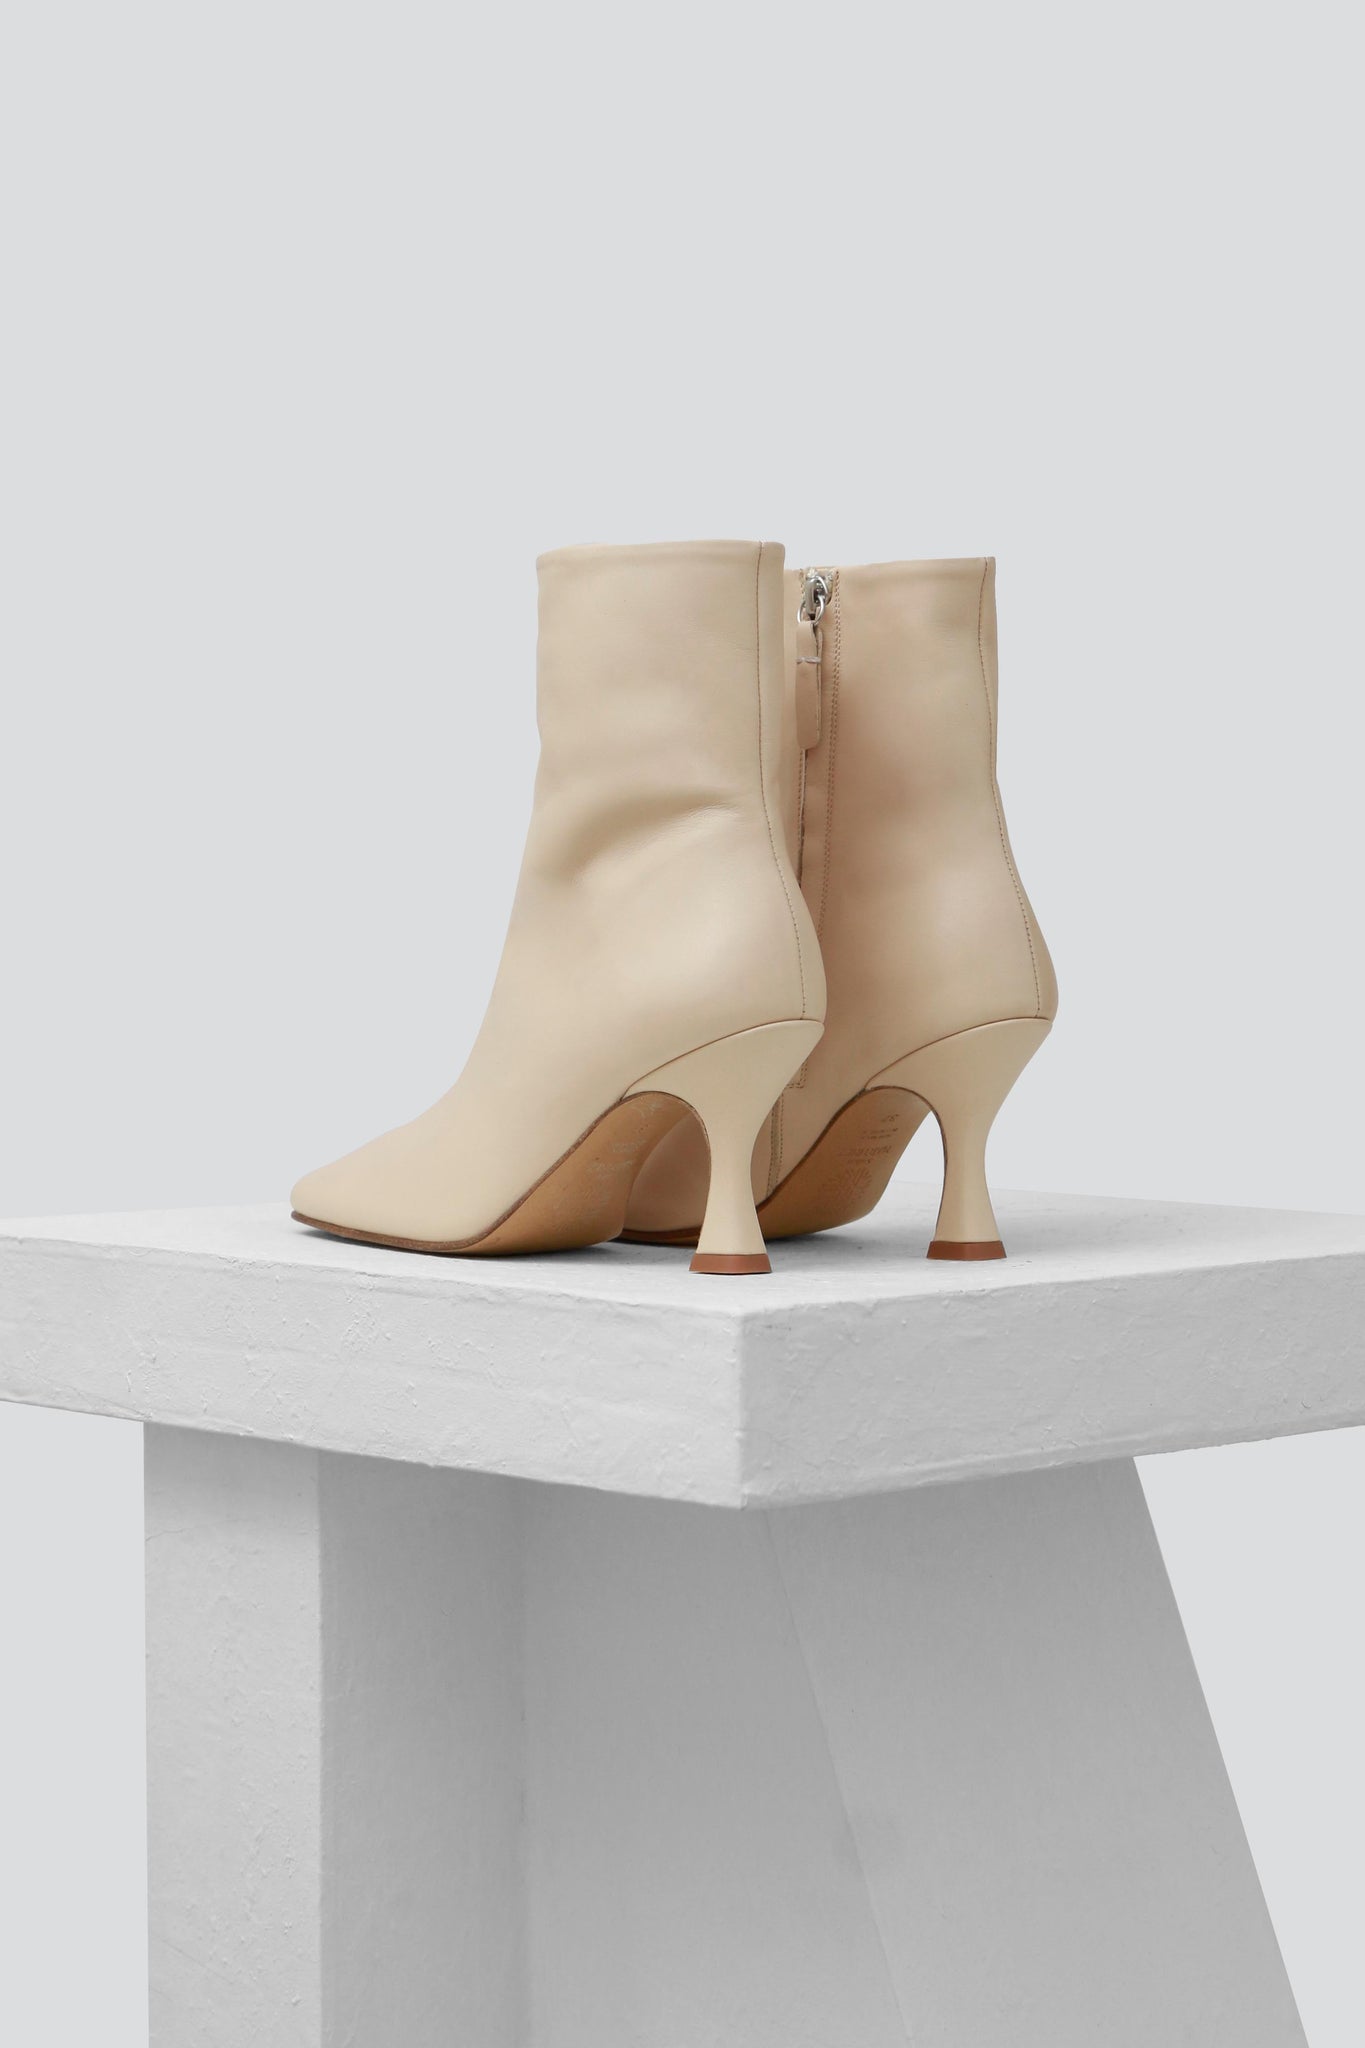 TATIANA - Beige Leather Ankle Boots